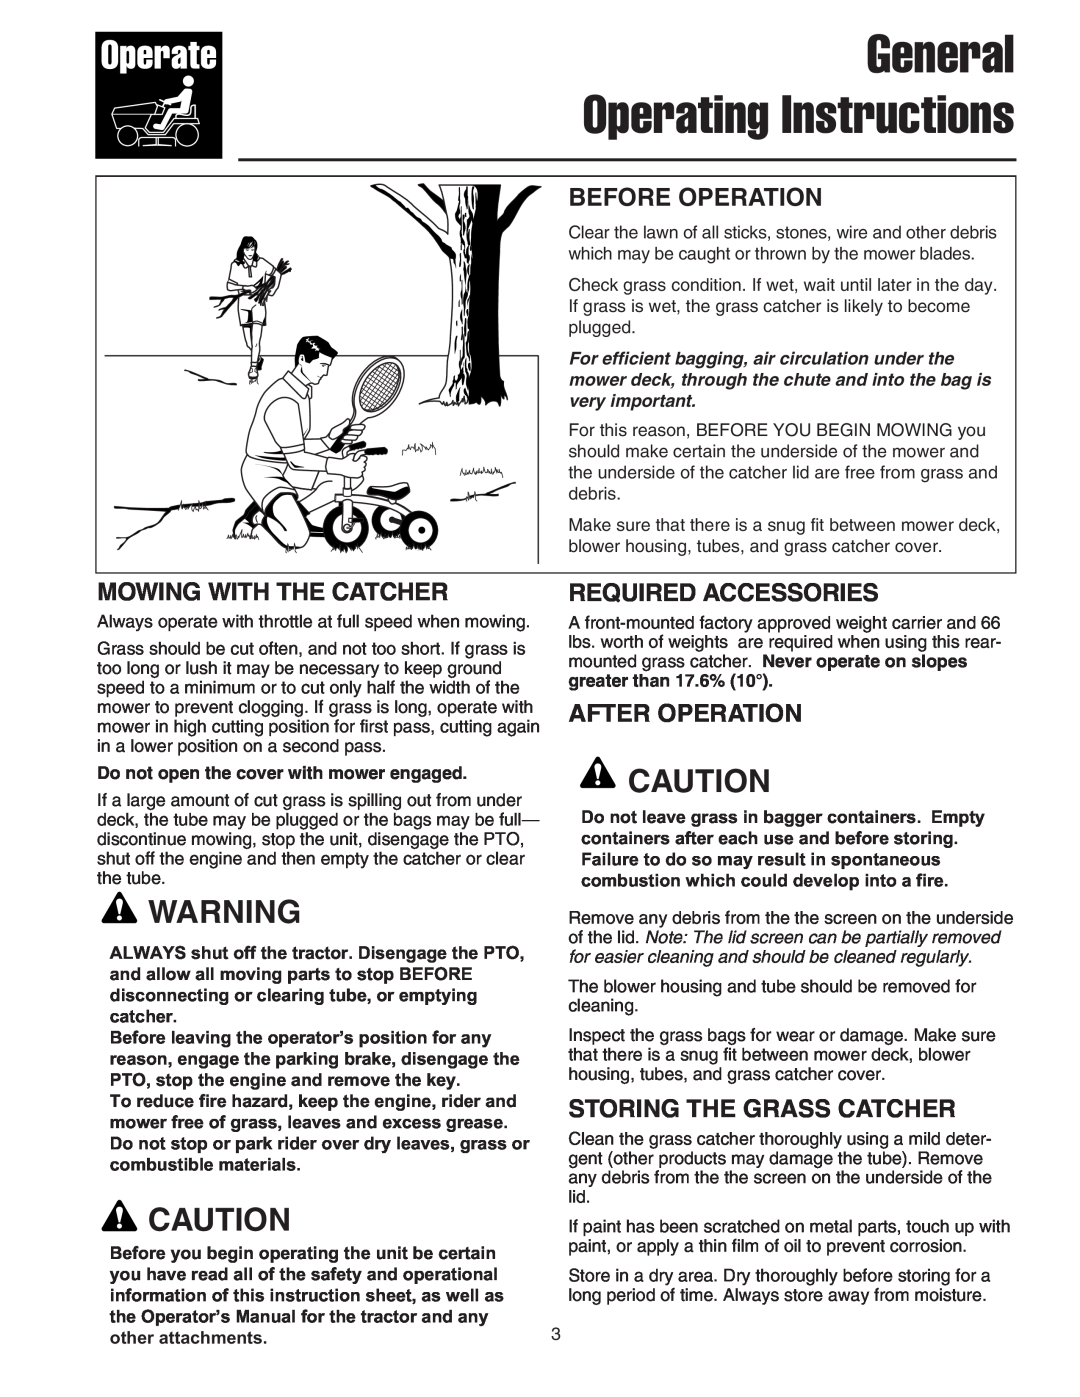 Snapper Clean Sweep Triple Catcher manual General Operating Instructions, Before Operation, Mowing With The Catcher 